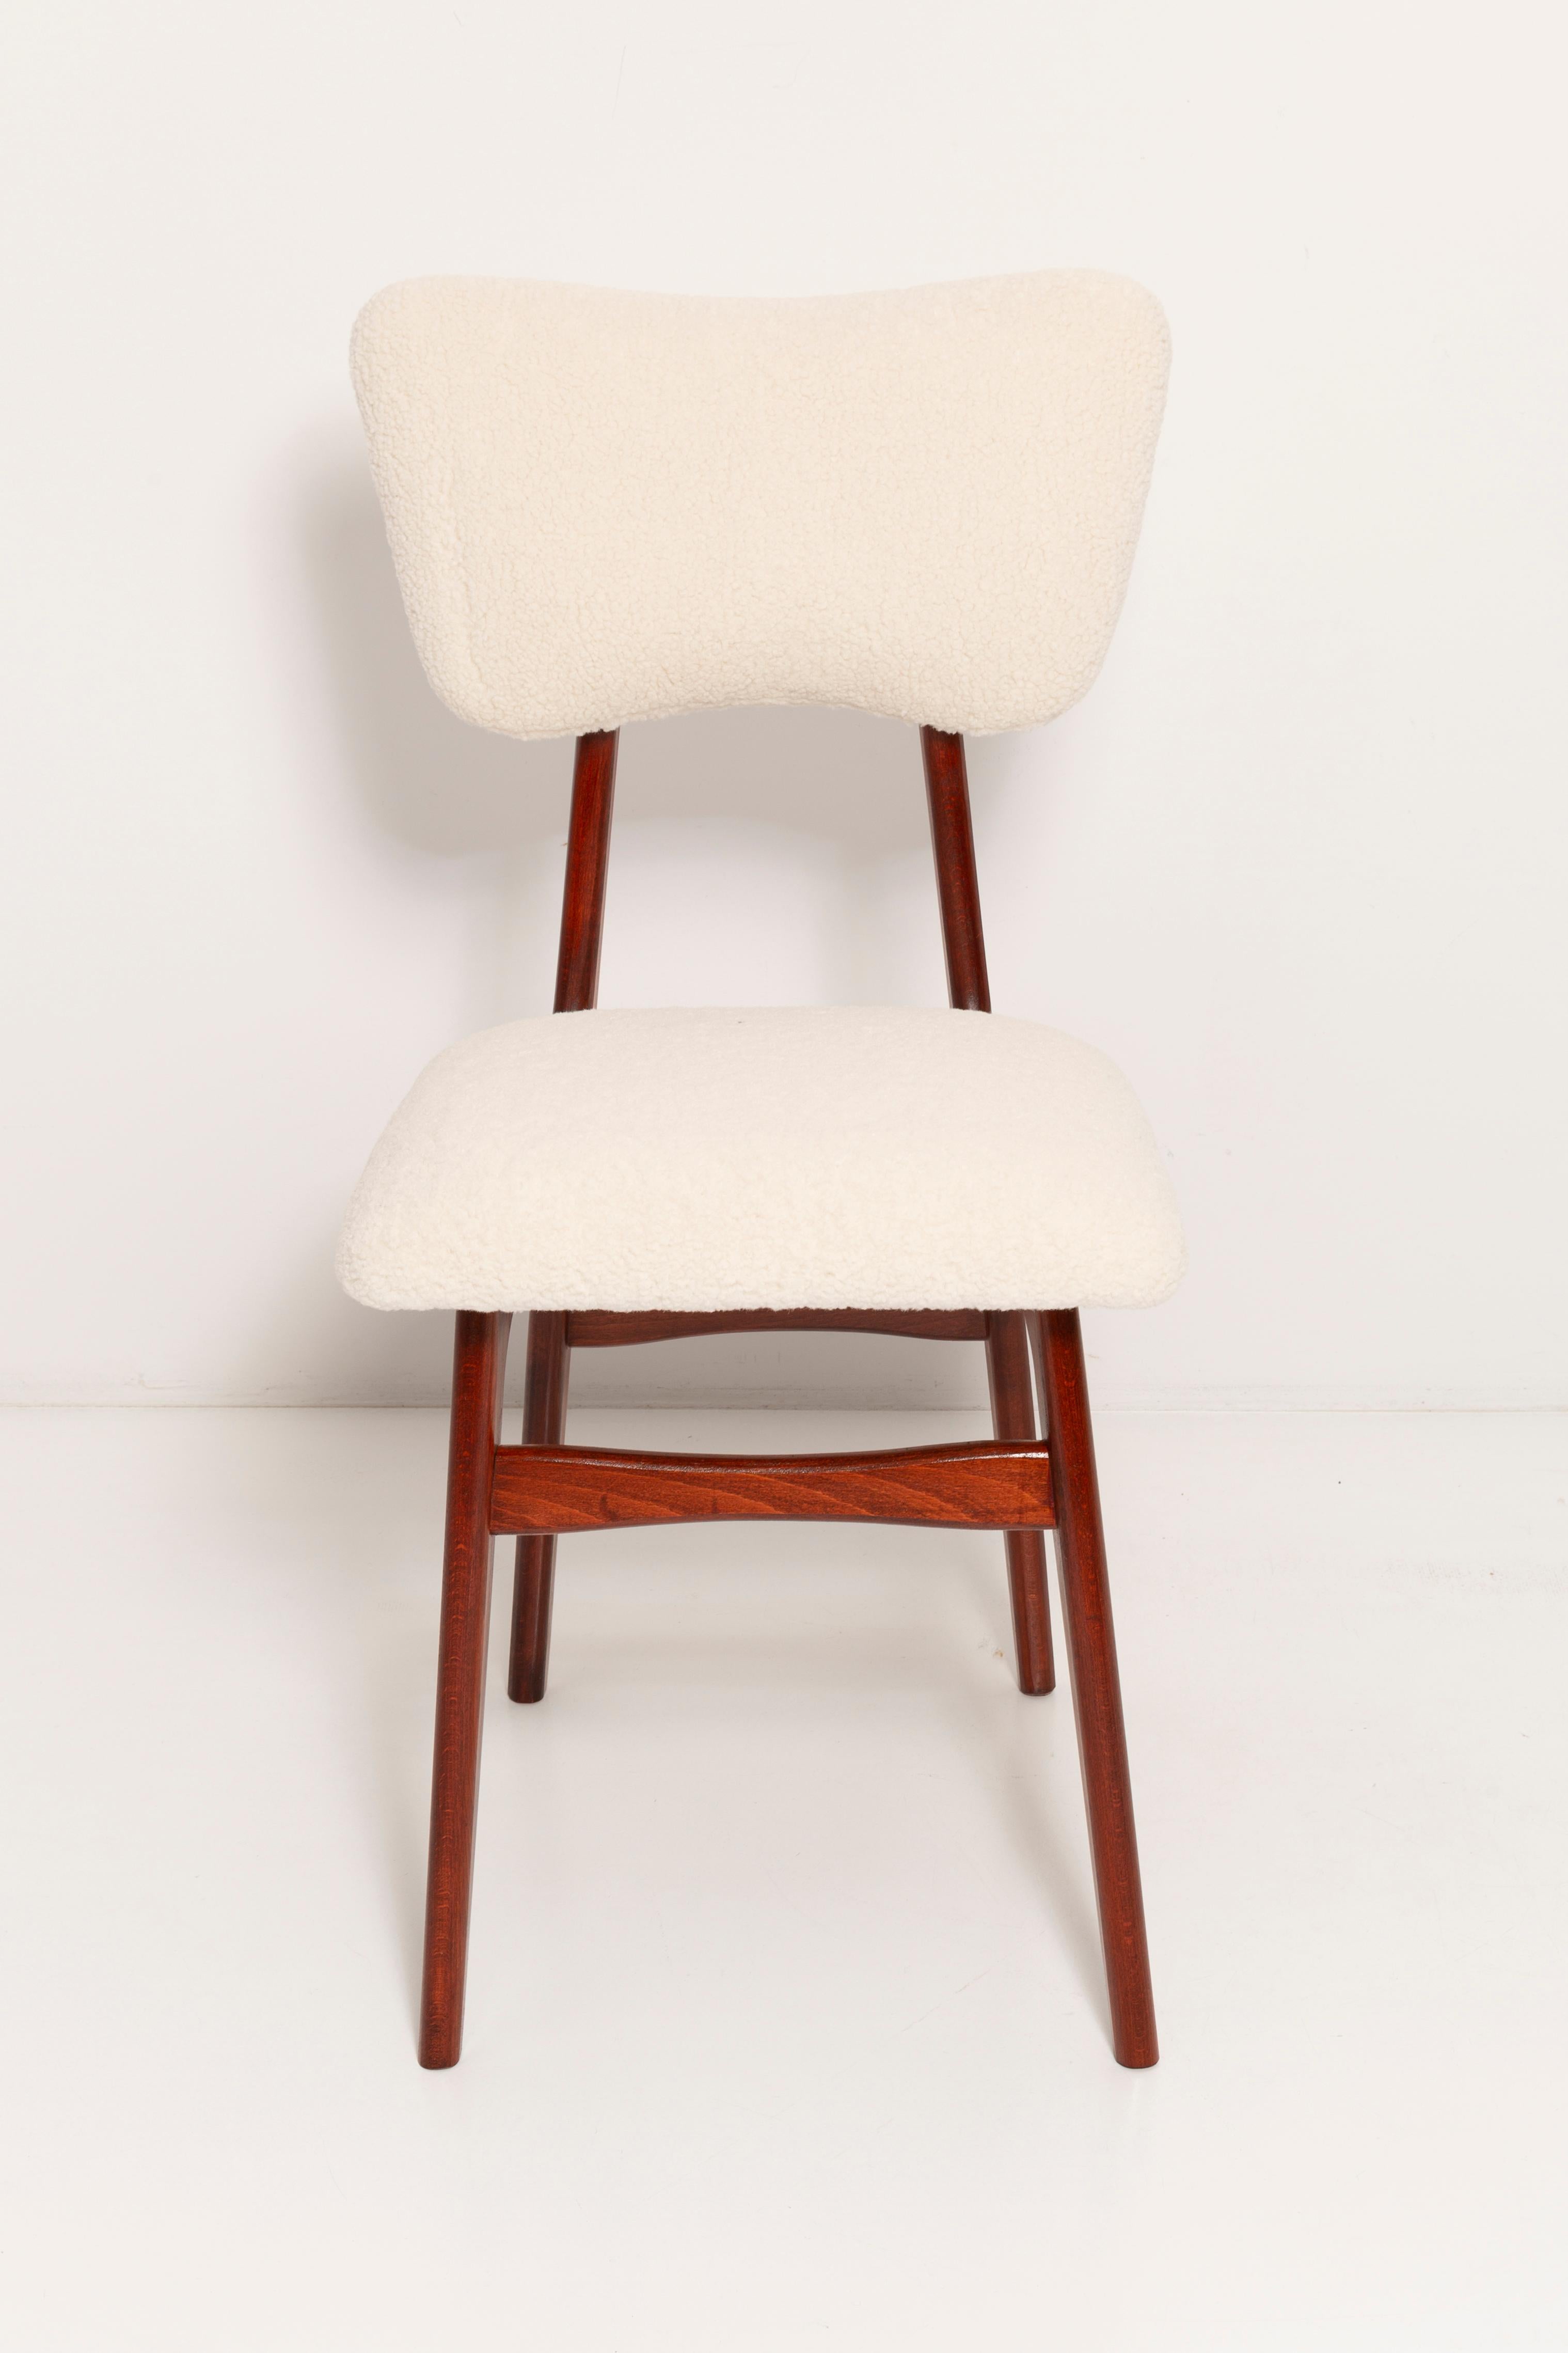 Six Light Cream Boucle 'Butterfly' Chairs, Europe, 1960s For Sale 8